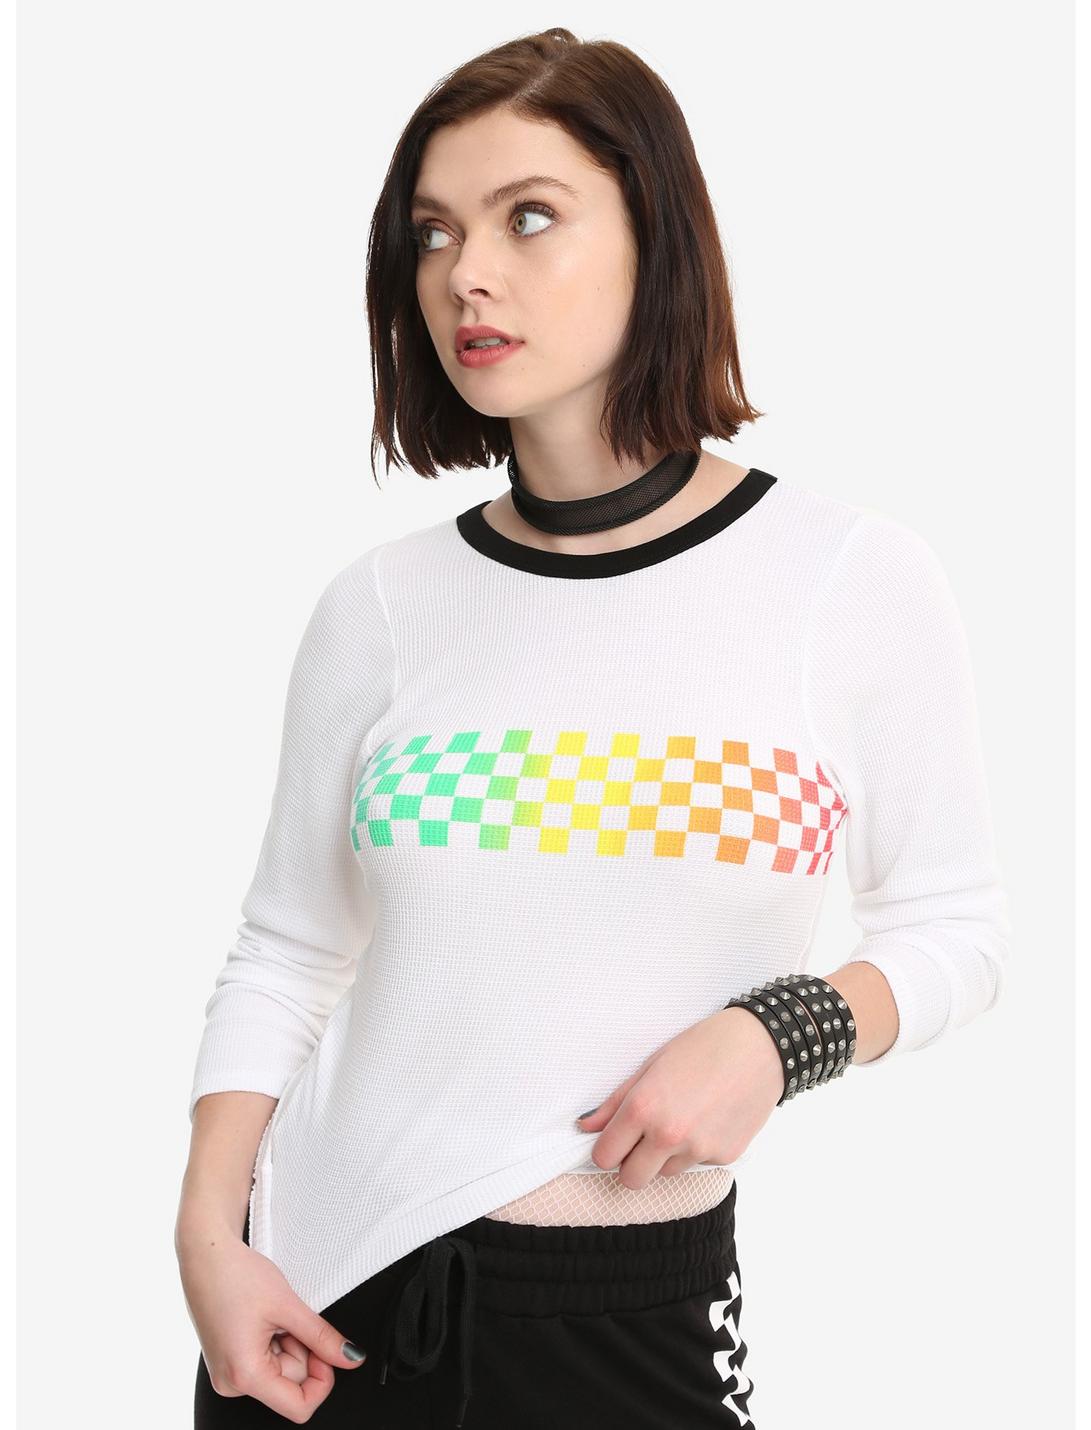 Rainbow Checkered Girls Long-Sleeve Thermal Top, WHITE, hi-res